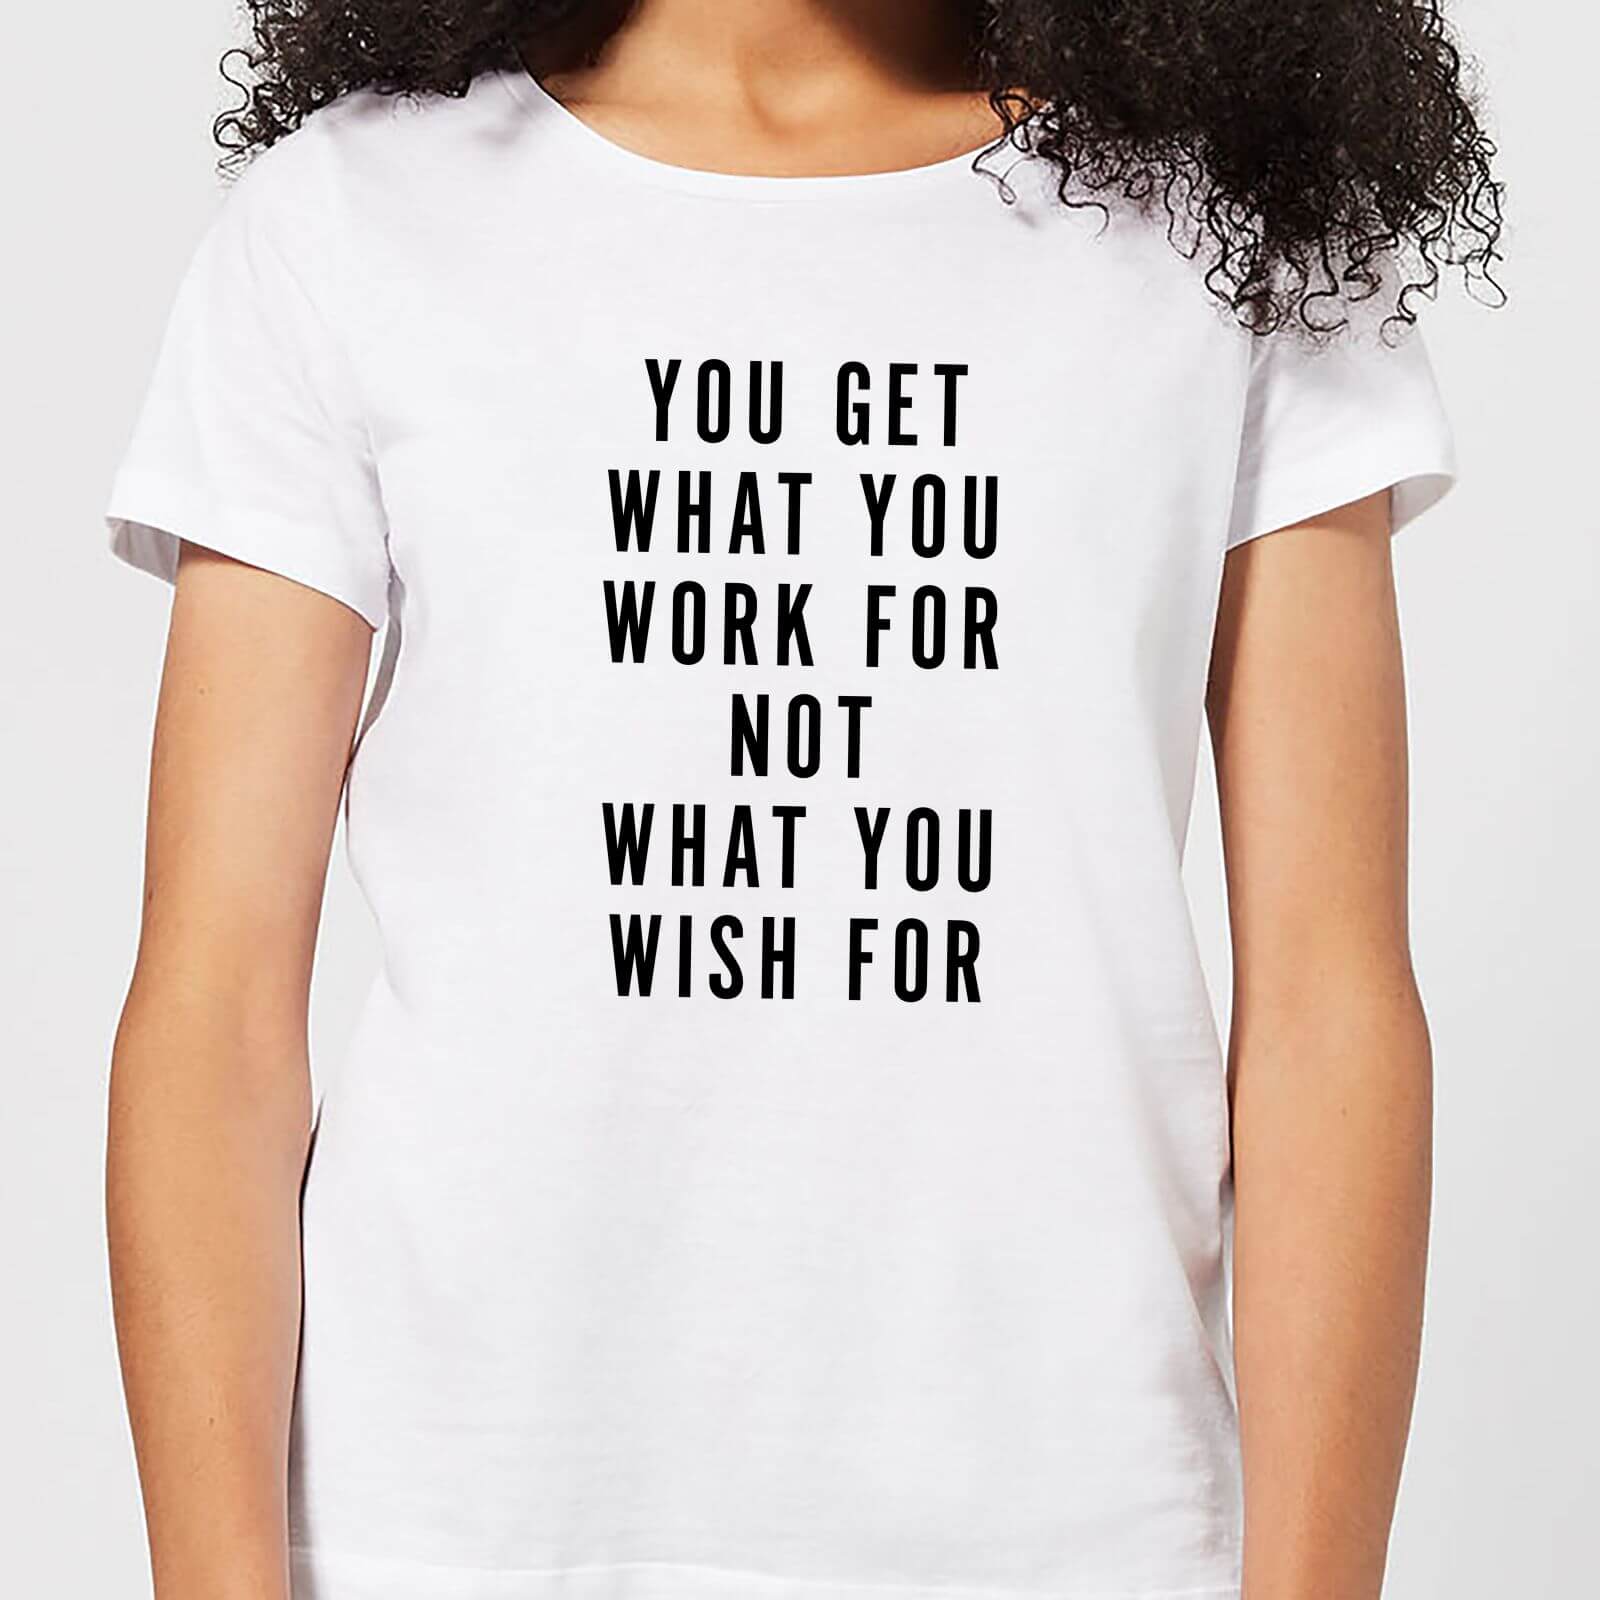 You Get What You Work for Women's T-Shirt - White - S - White